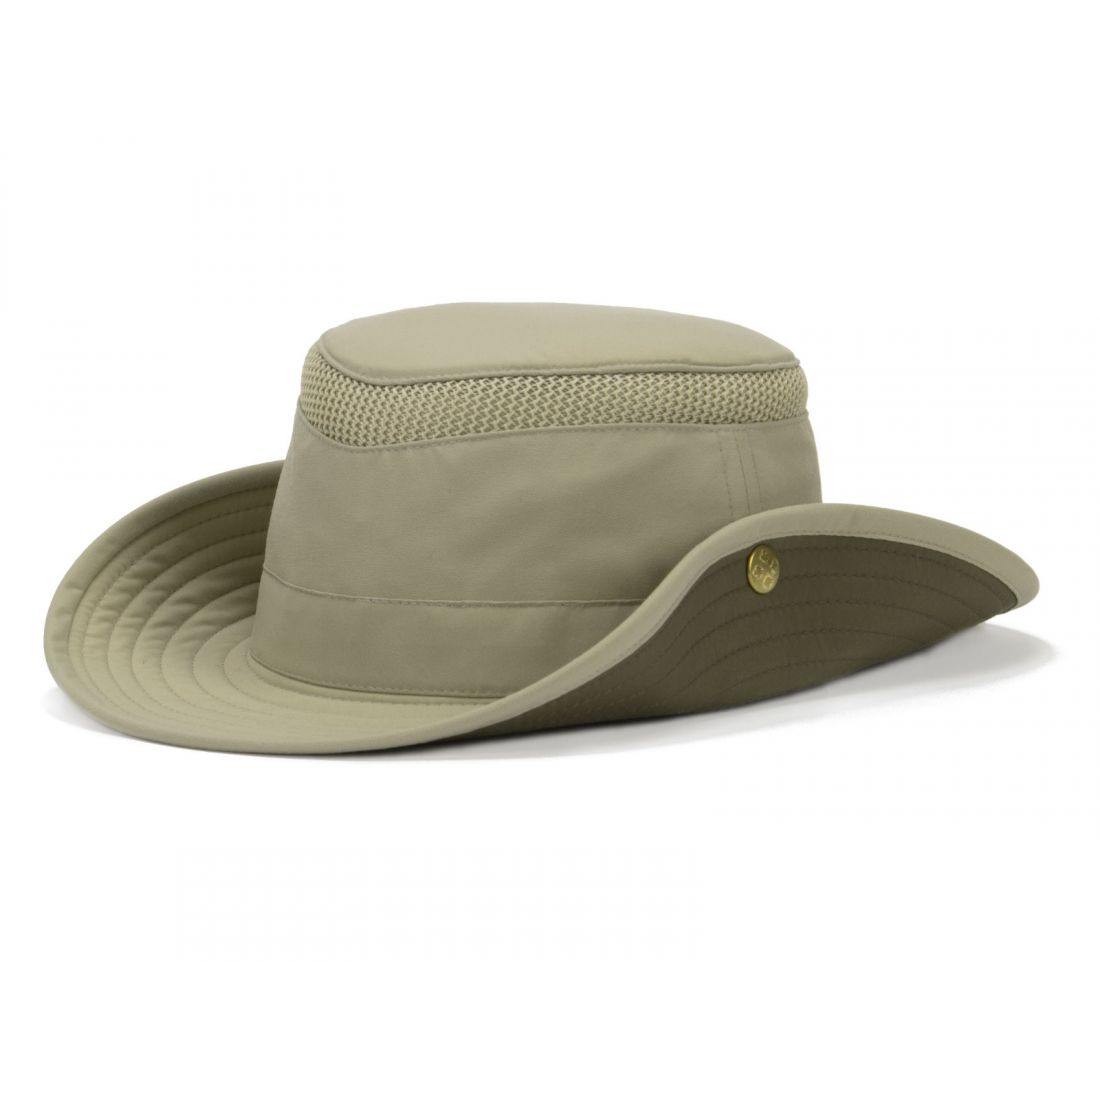 Tilley T4MO-1 Hikers Hat Grey 7 3/8